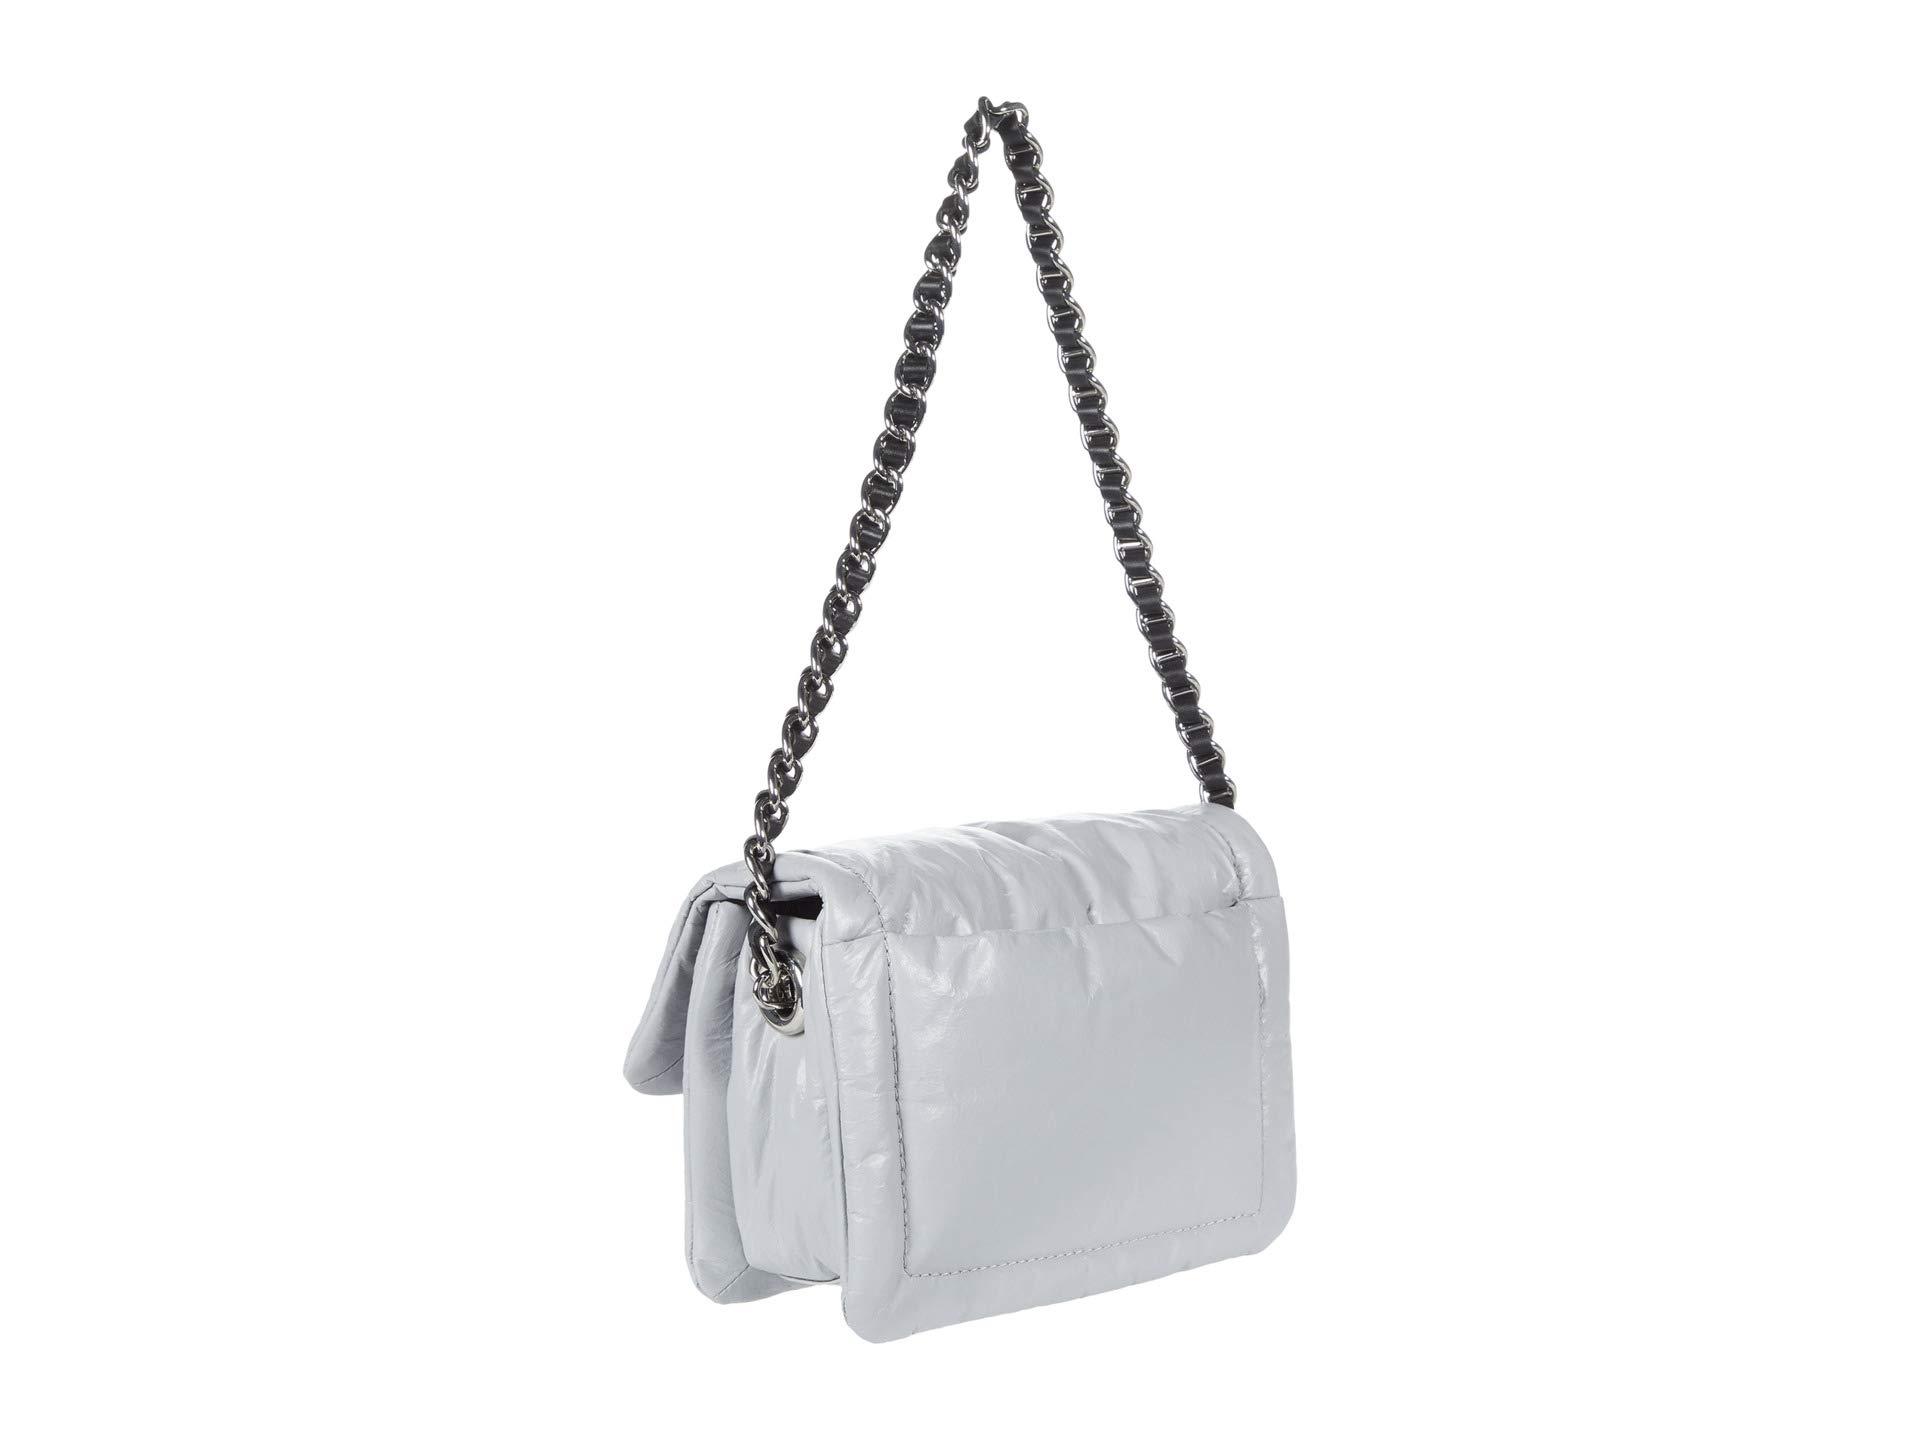 Cross body bags Marc Jacobs - The Pillow bag in light grey - M0015416536